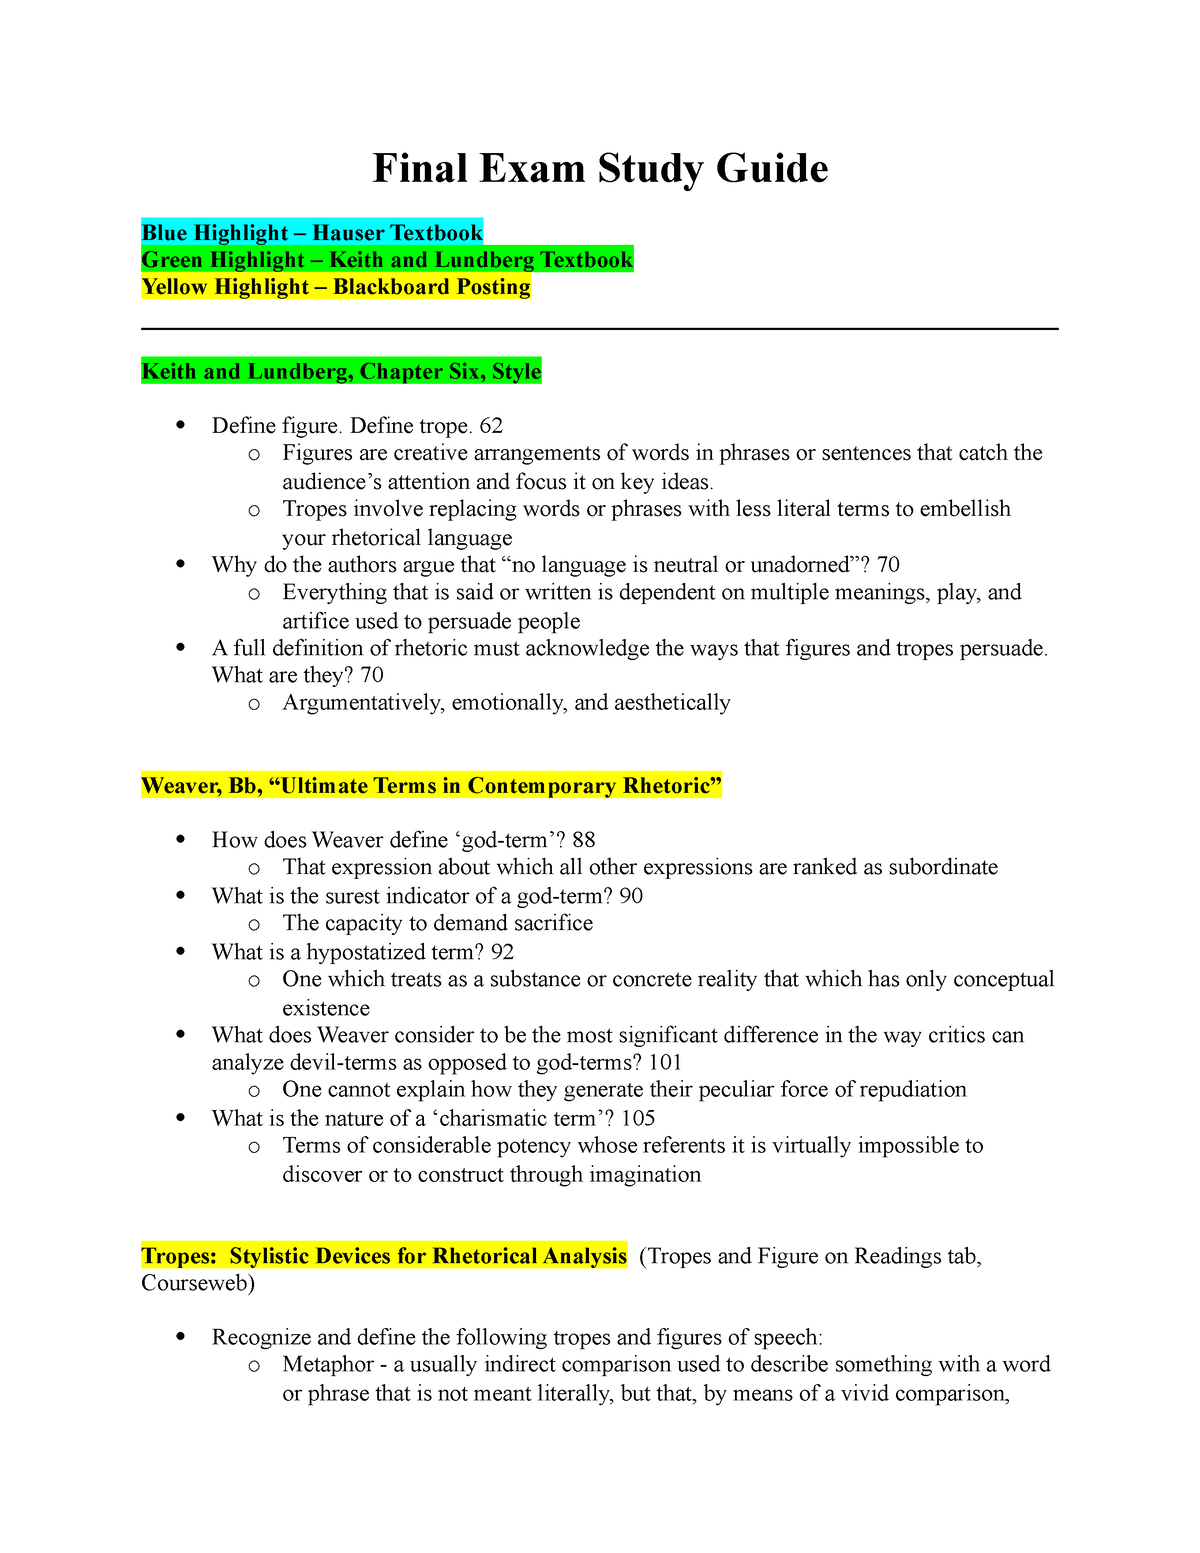 Final Quiz Study Guide - Study Guide Final Quiz December 1 Be sure